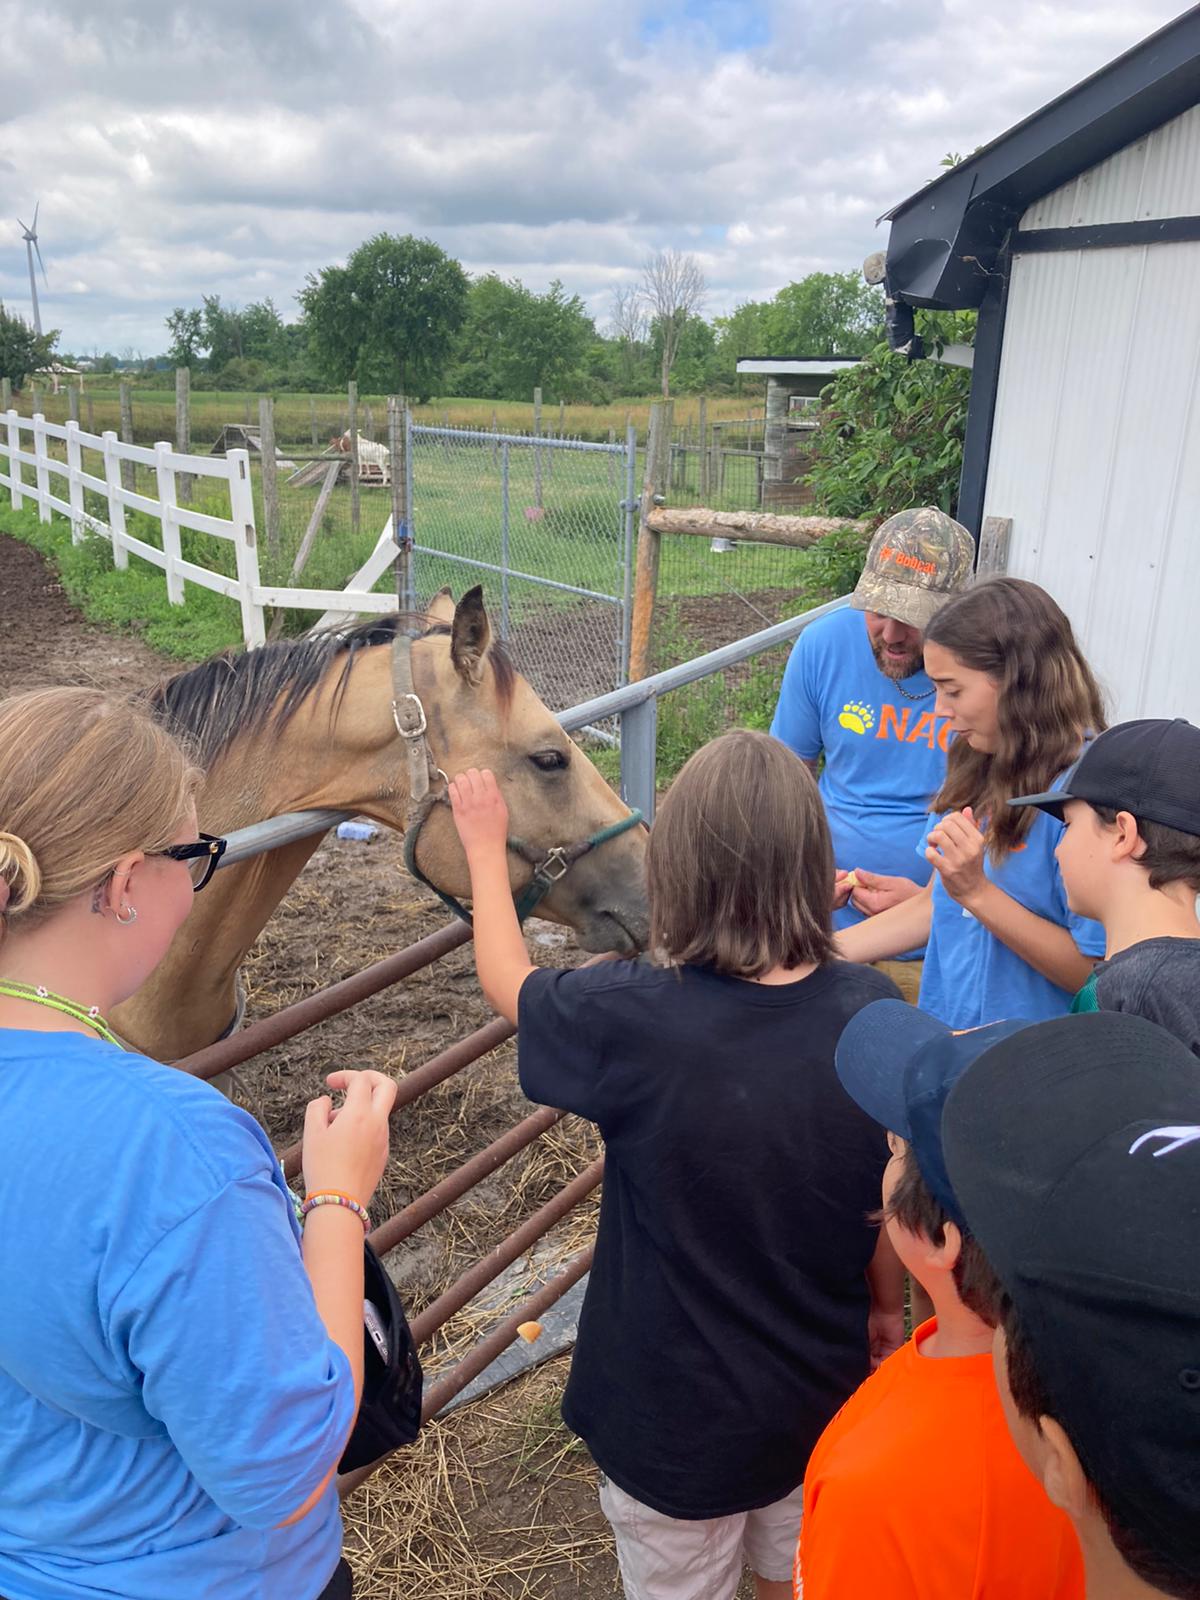 Campers giving the horse a treat